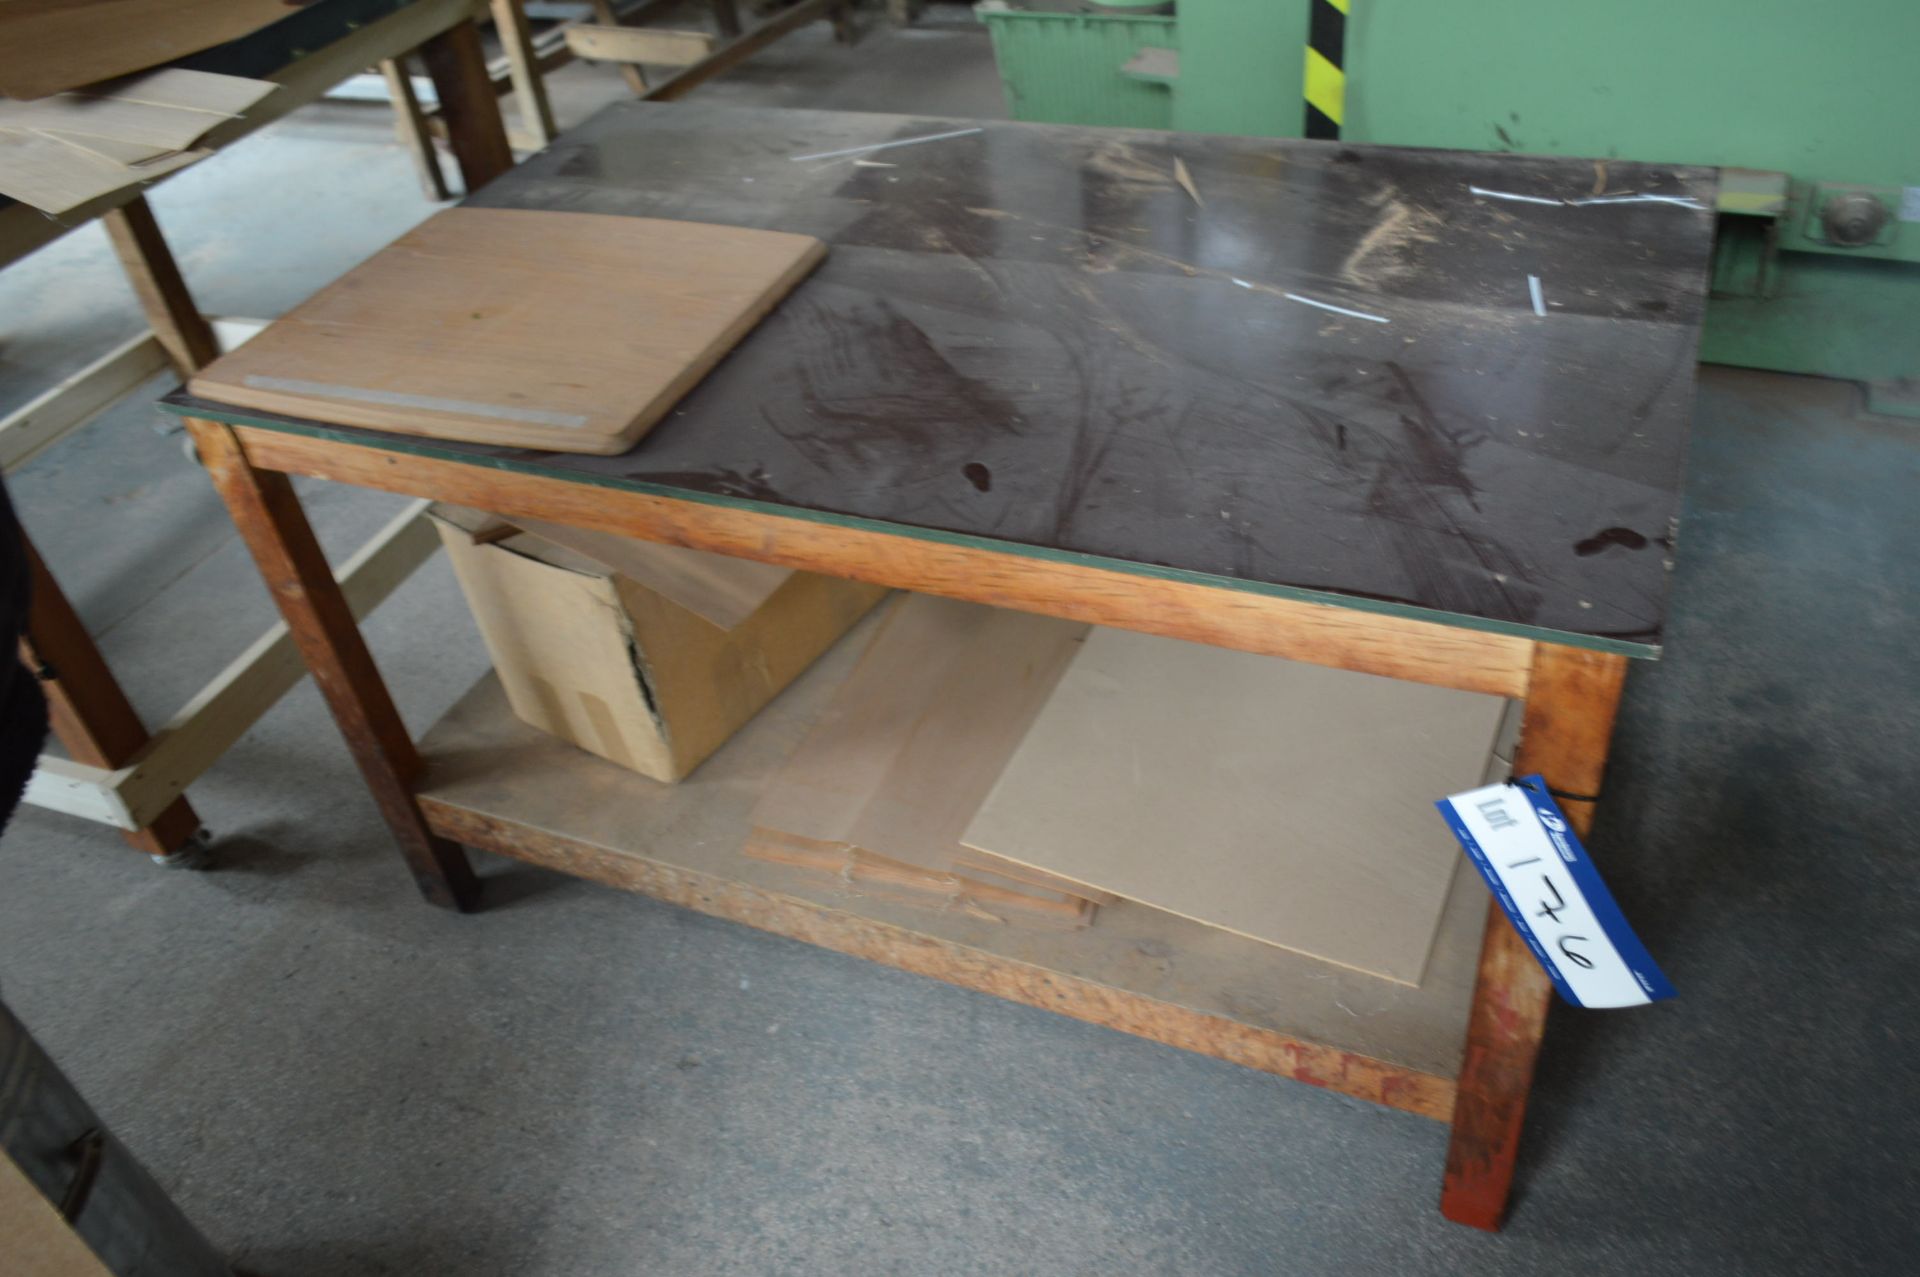 Bench, approx. 1.4m x 830mm